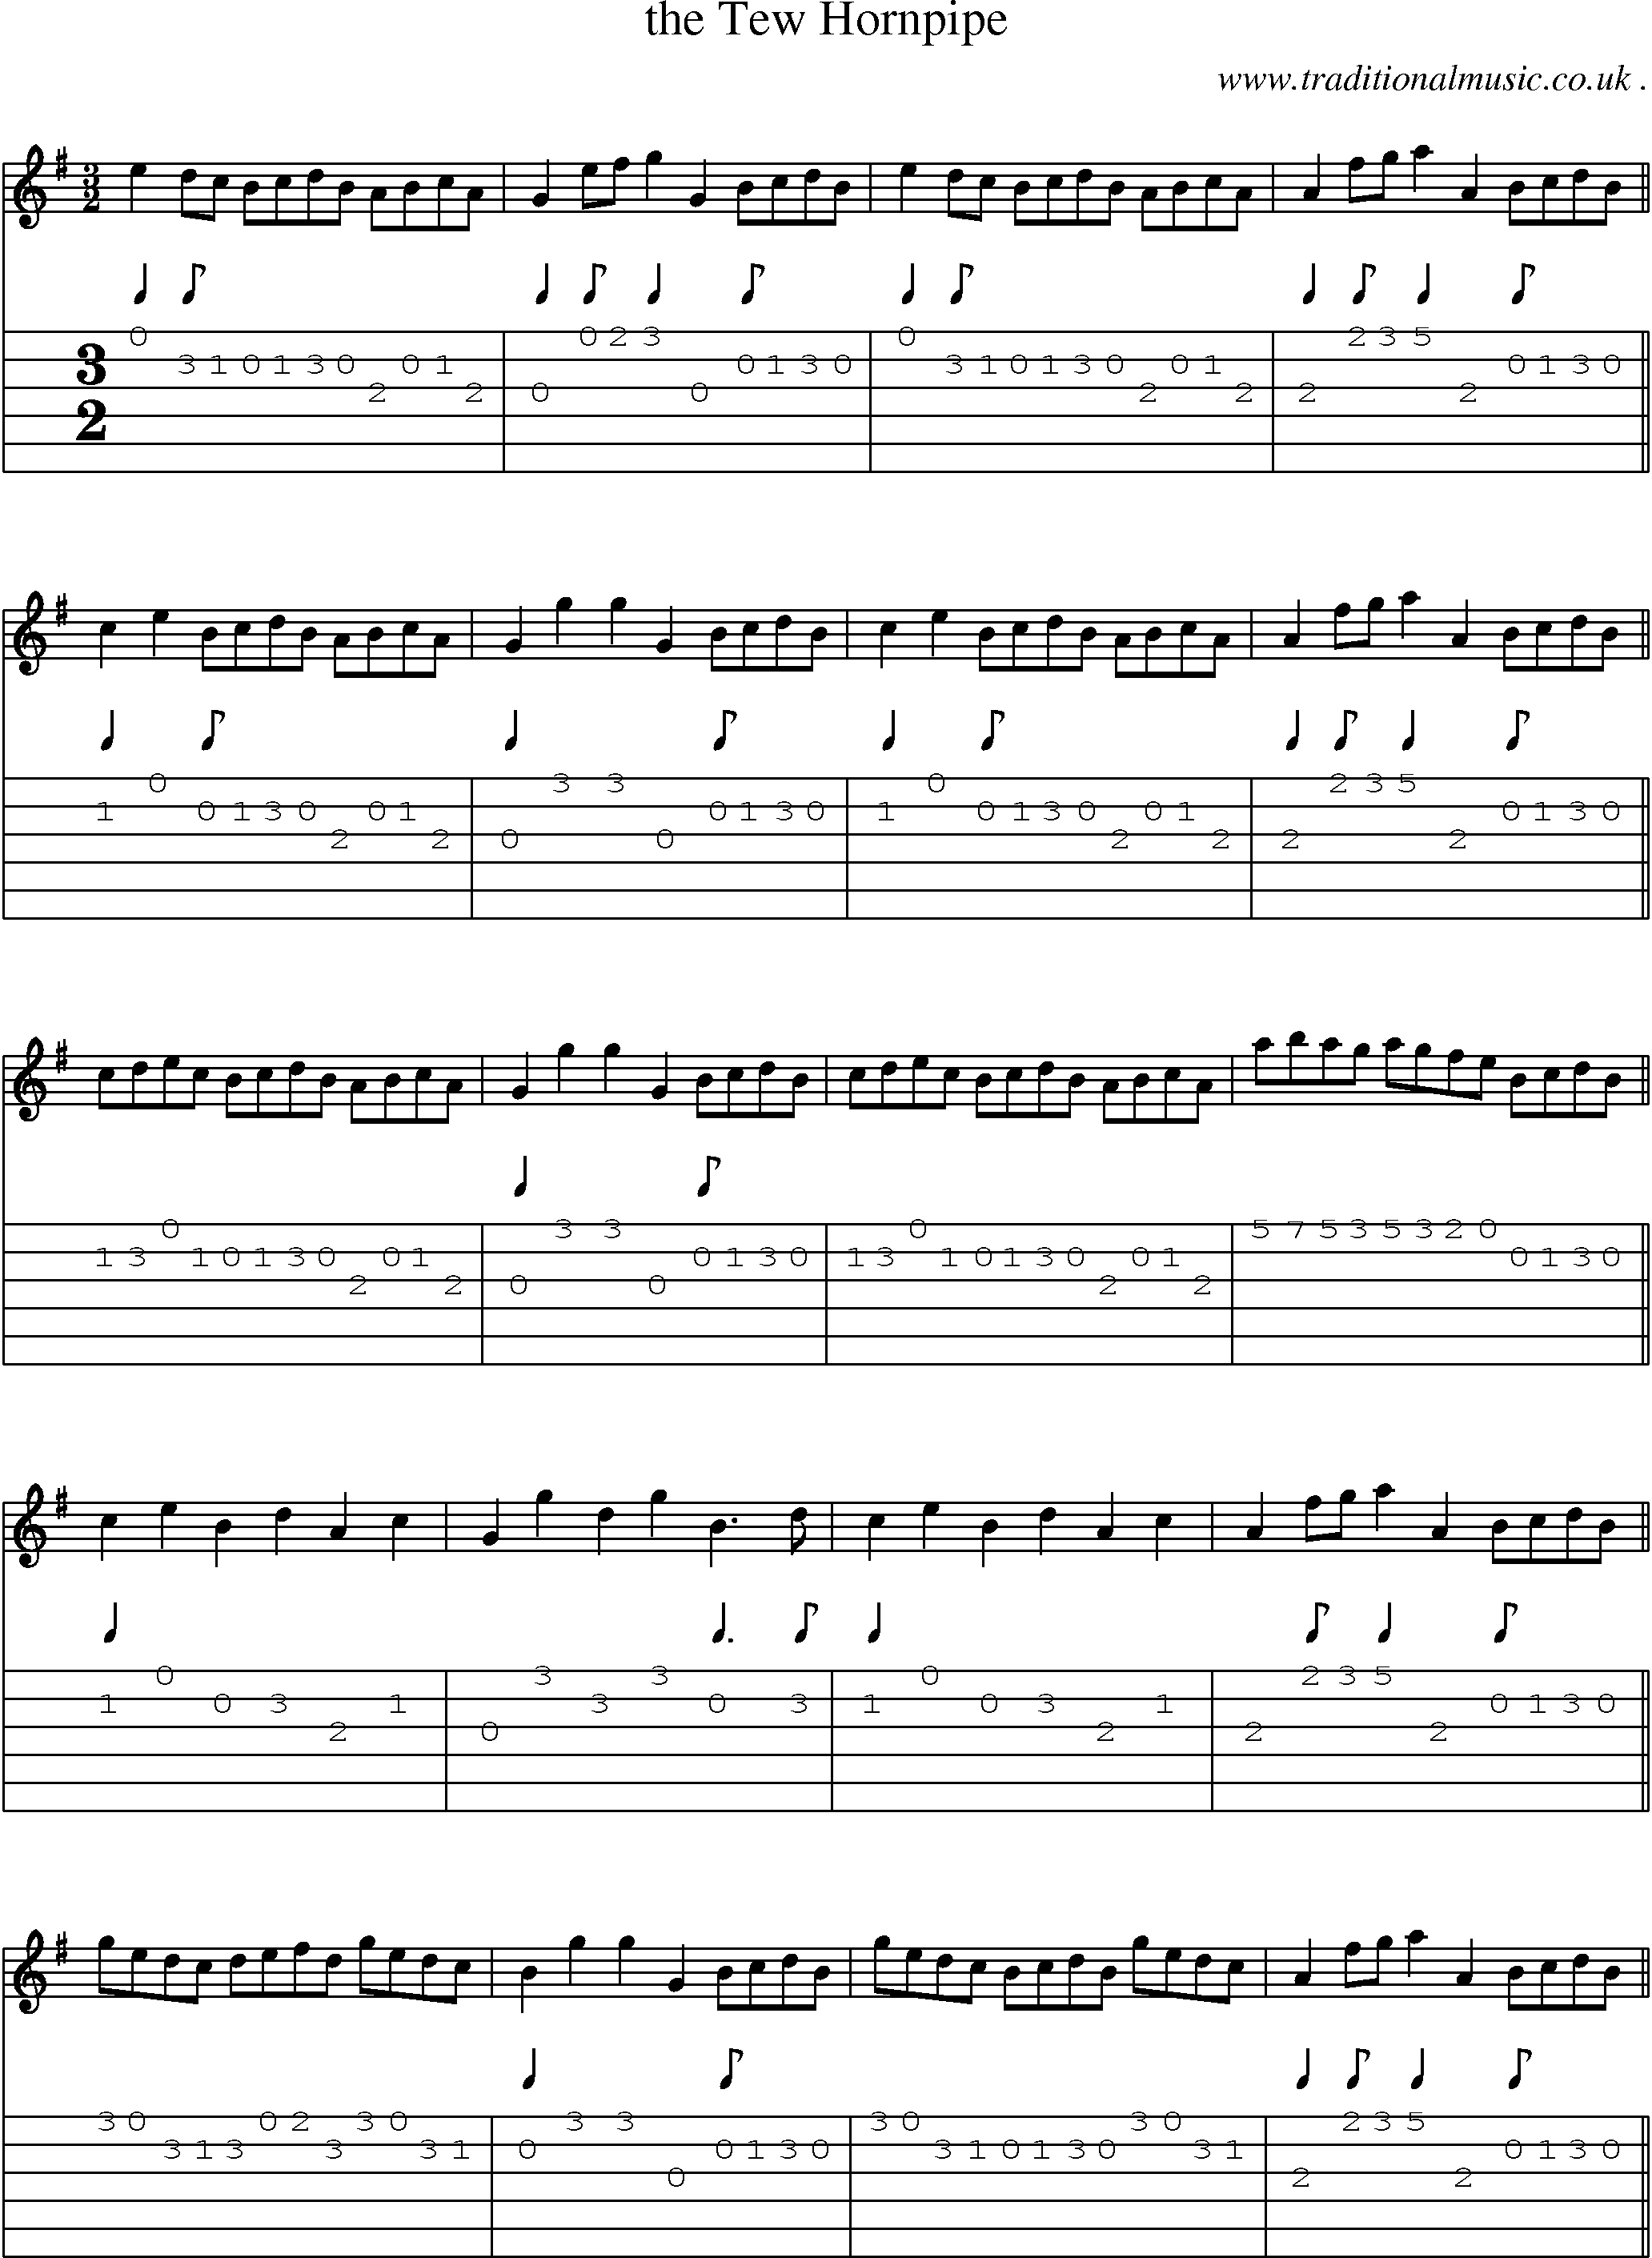 Sheet-Music and Guitar Tabs for The Tew Hornpipe